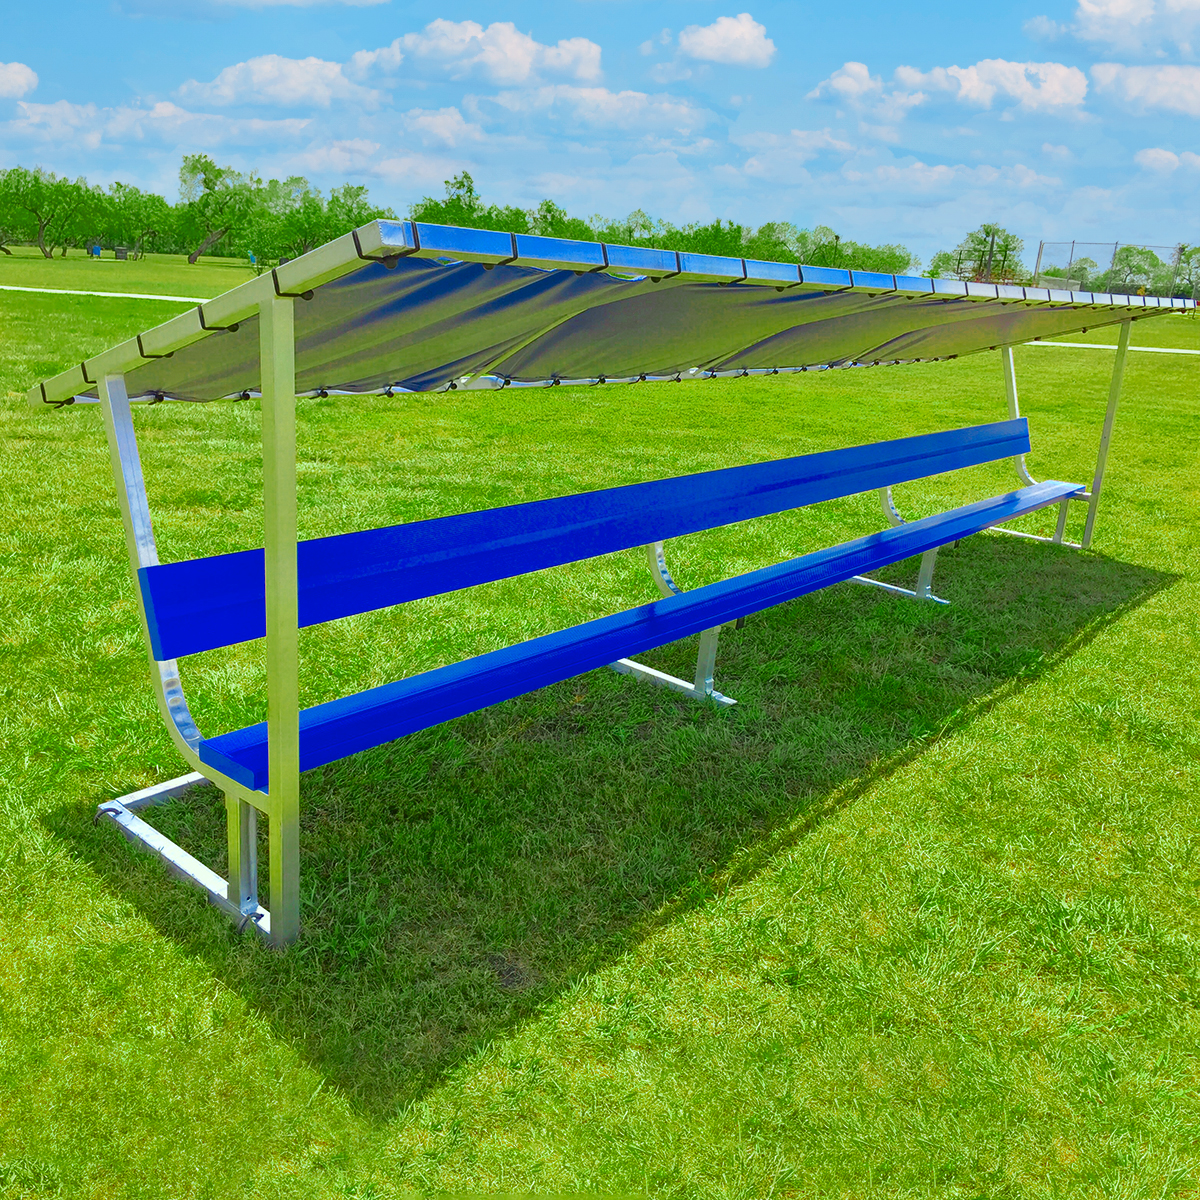 Covered Athletic Team Bench - Your Keeper Goals Athletic Equipment ⋆